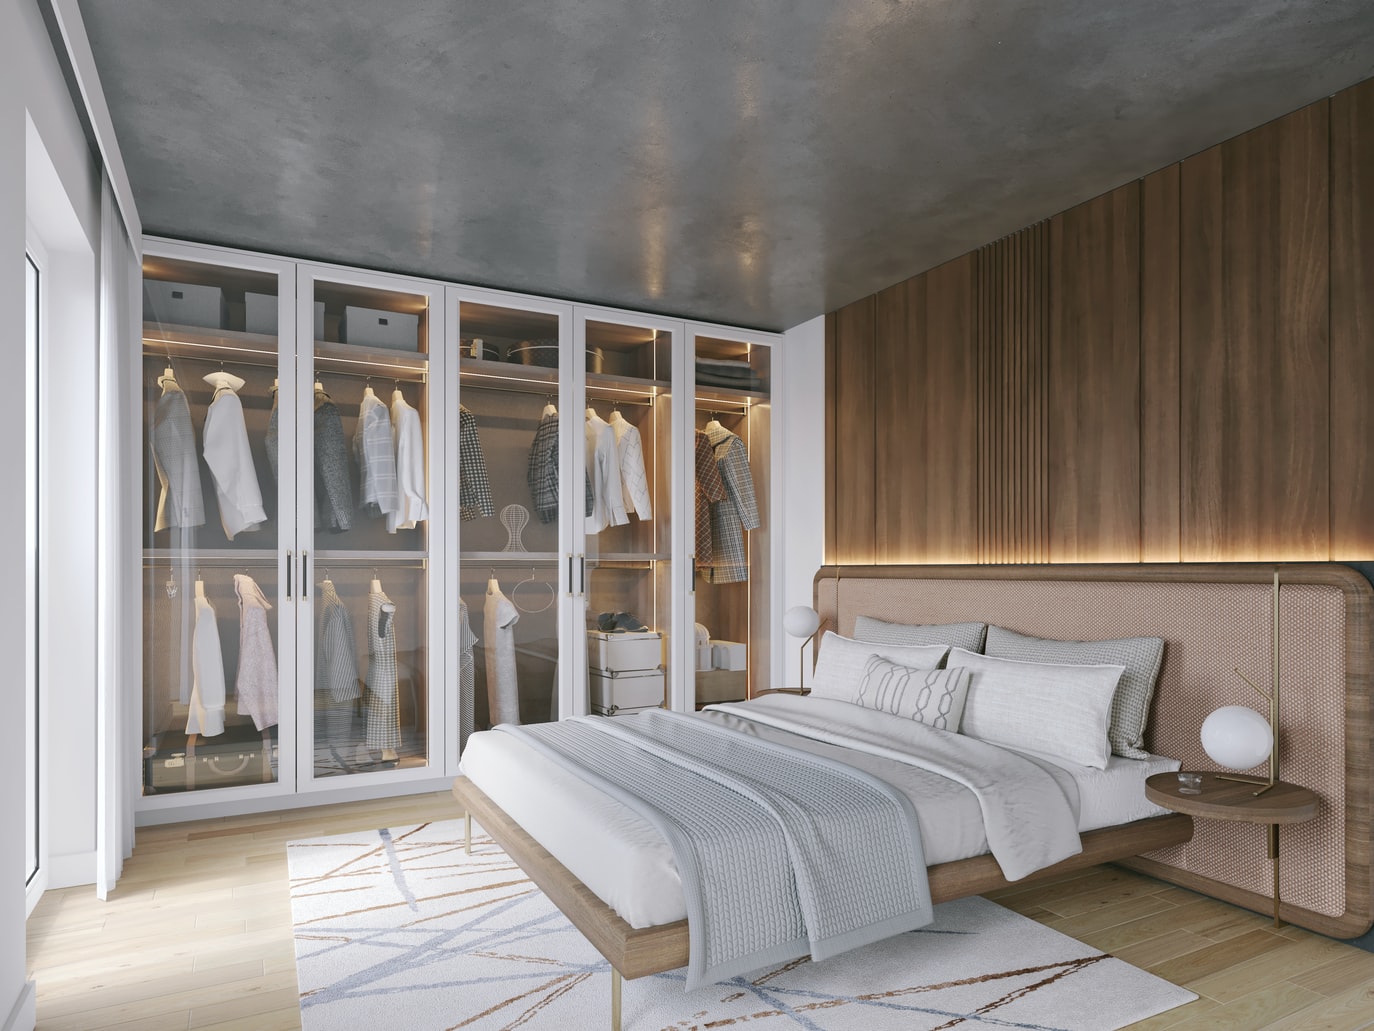 The Benefits of a Walk-In Wardrobe for Your Home